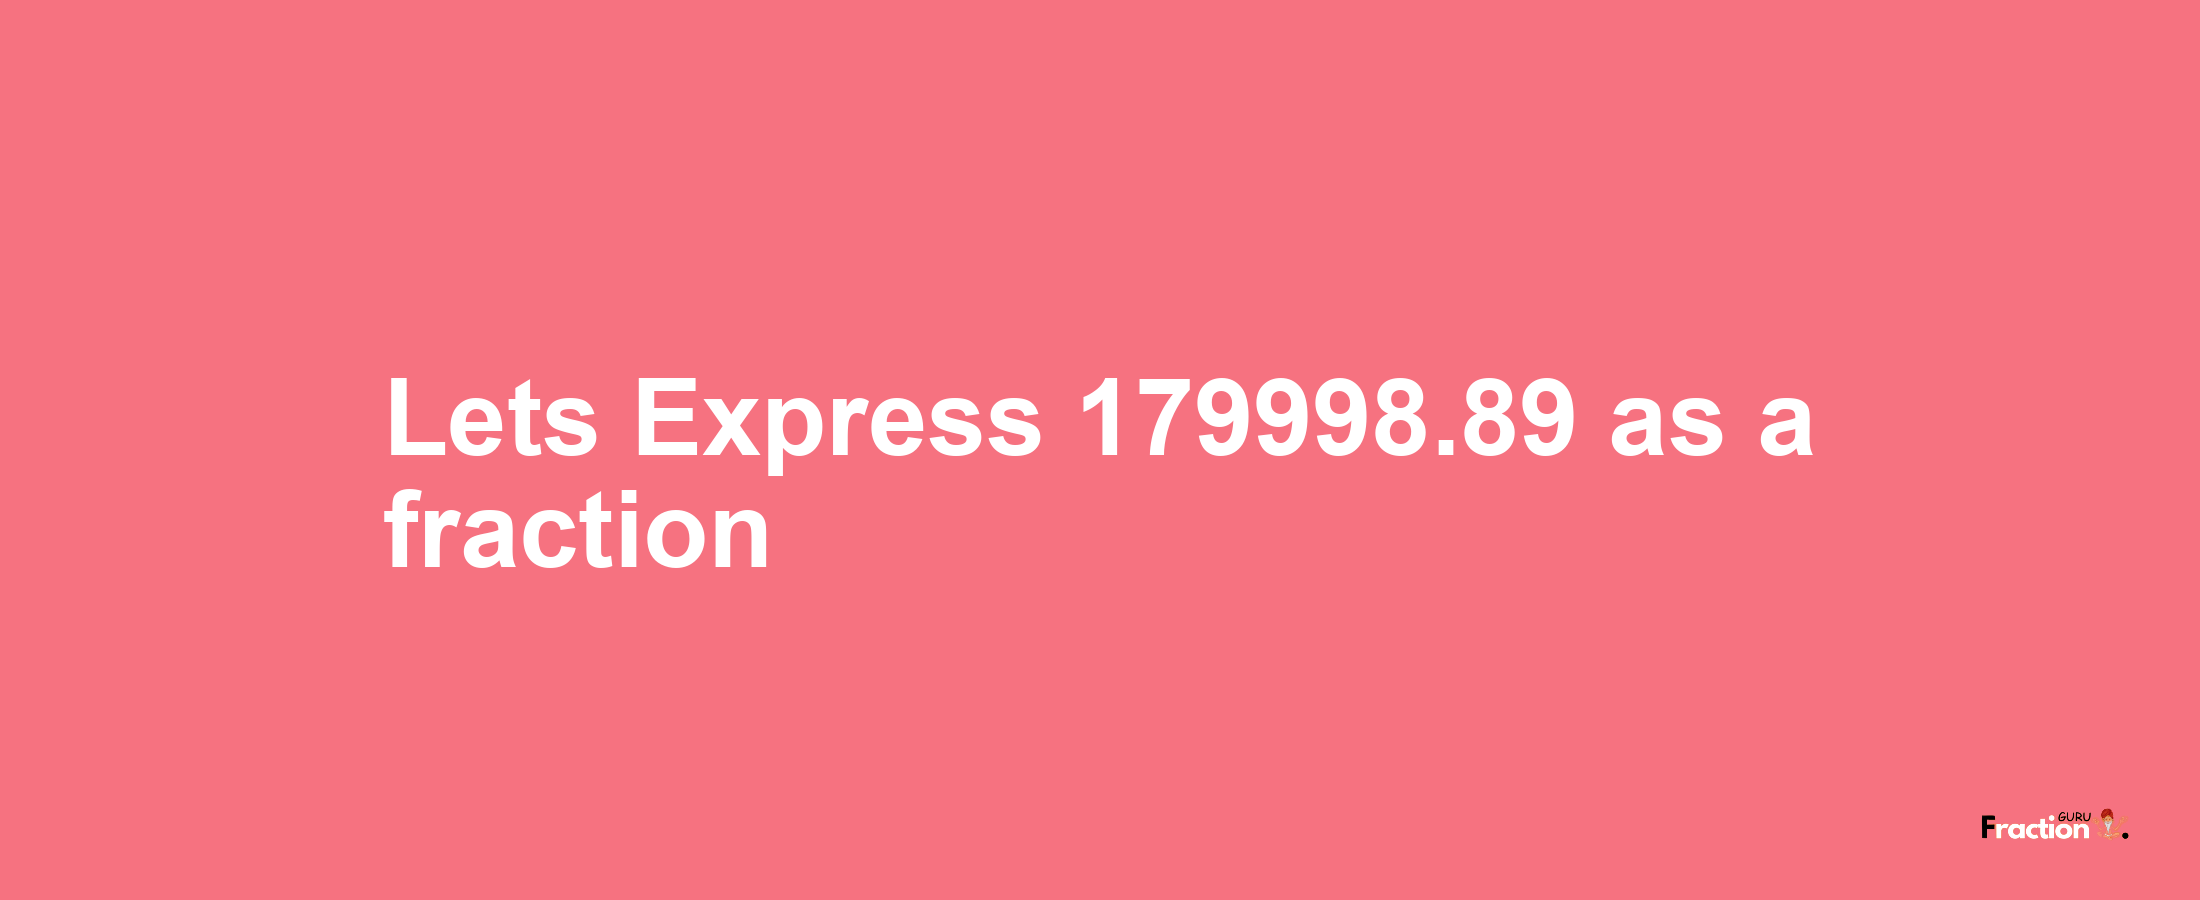 Lets Express 179998.89 as afraction